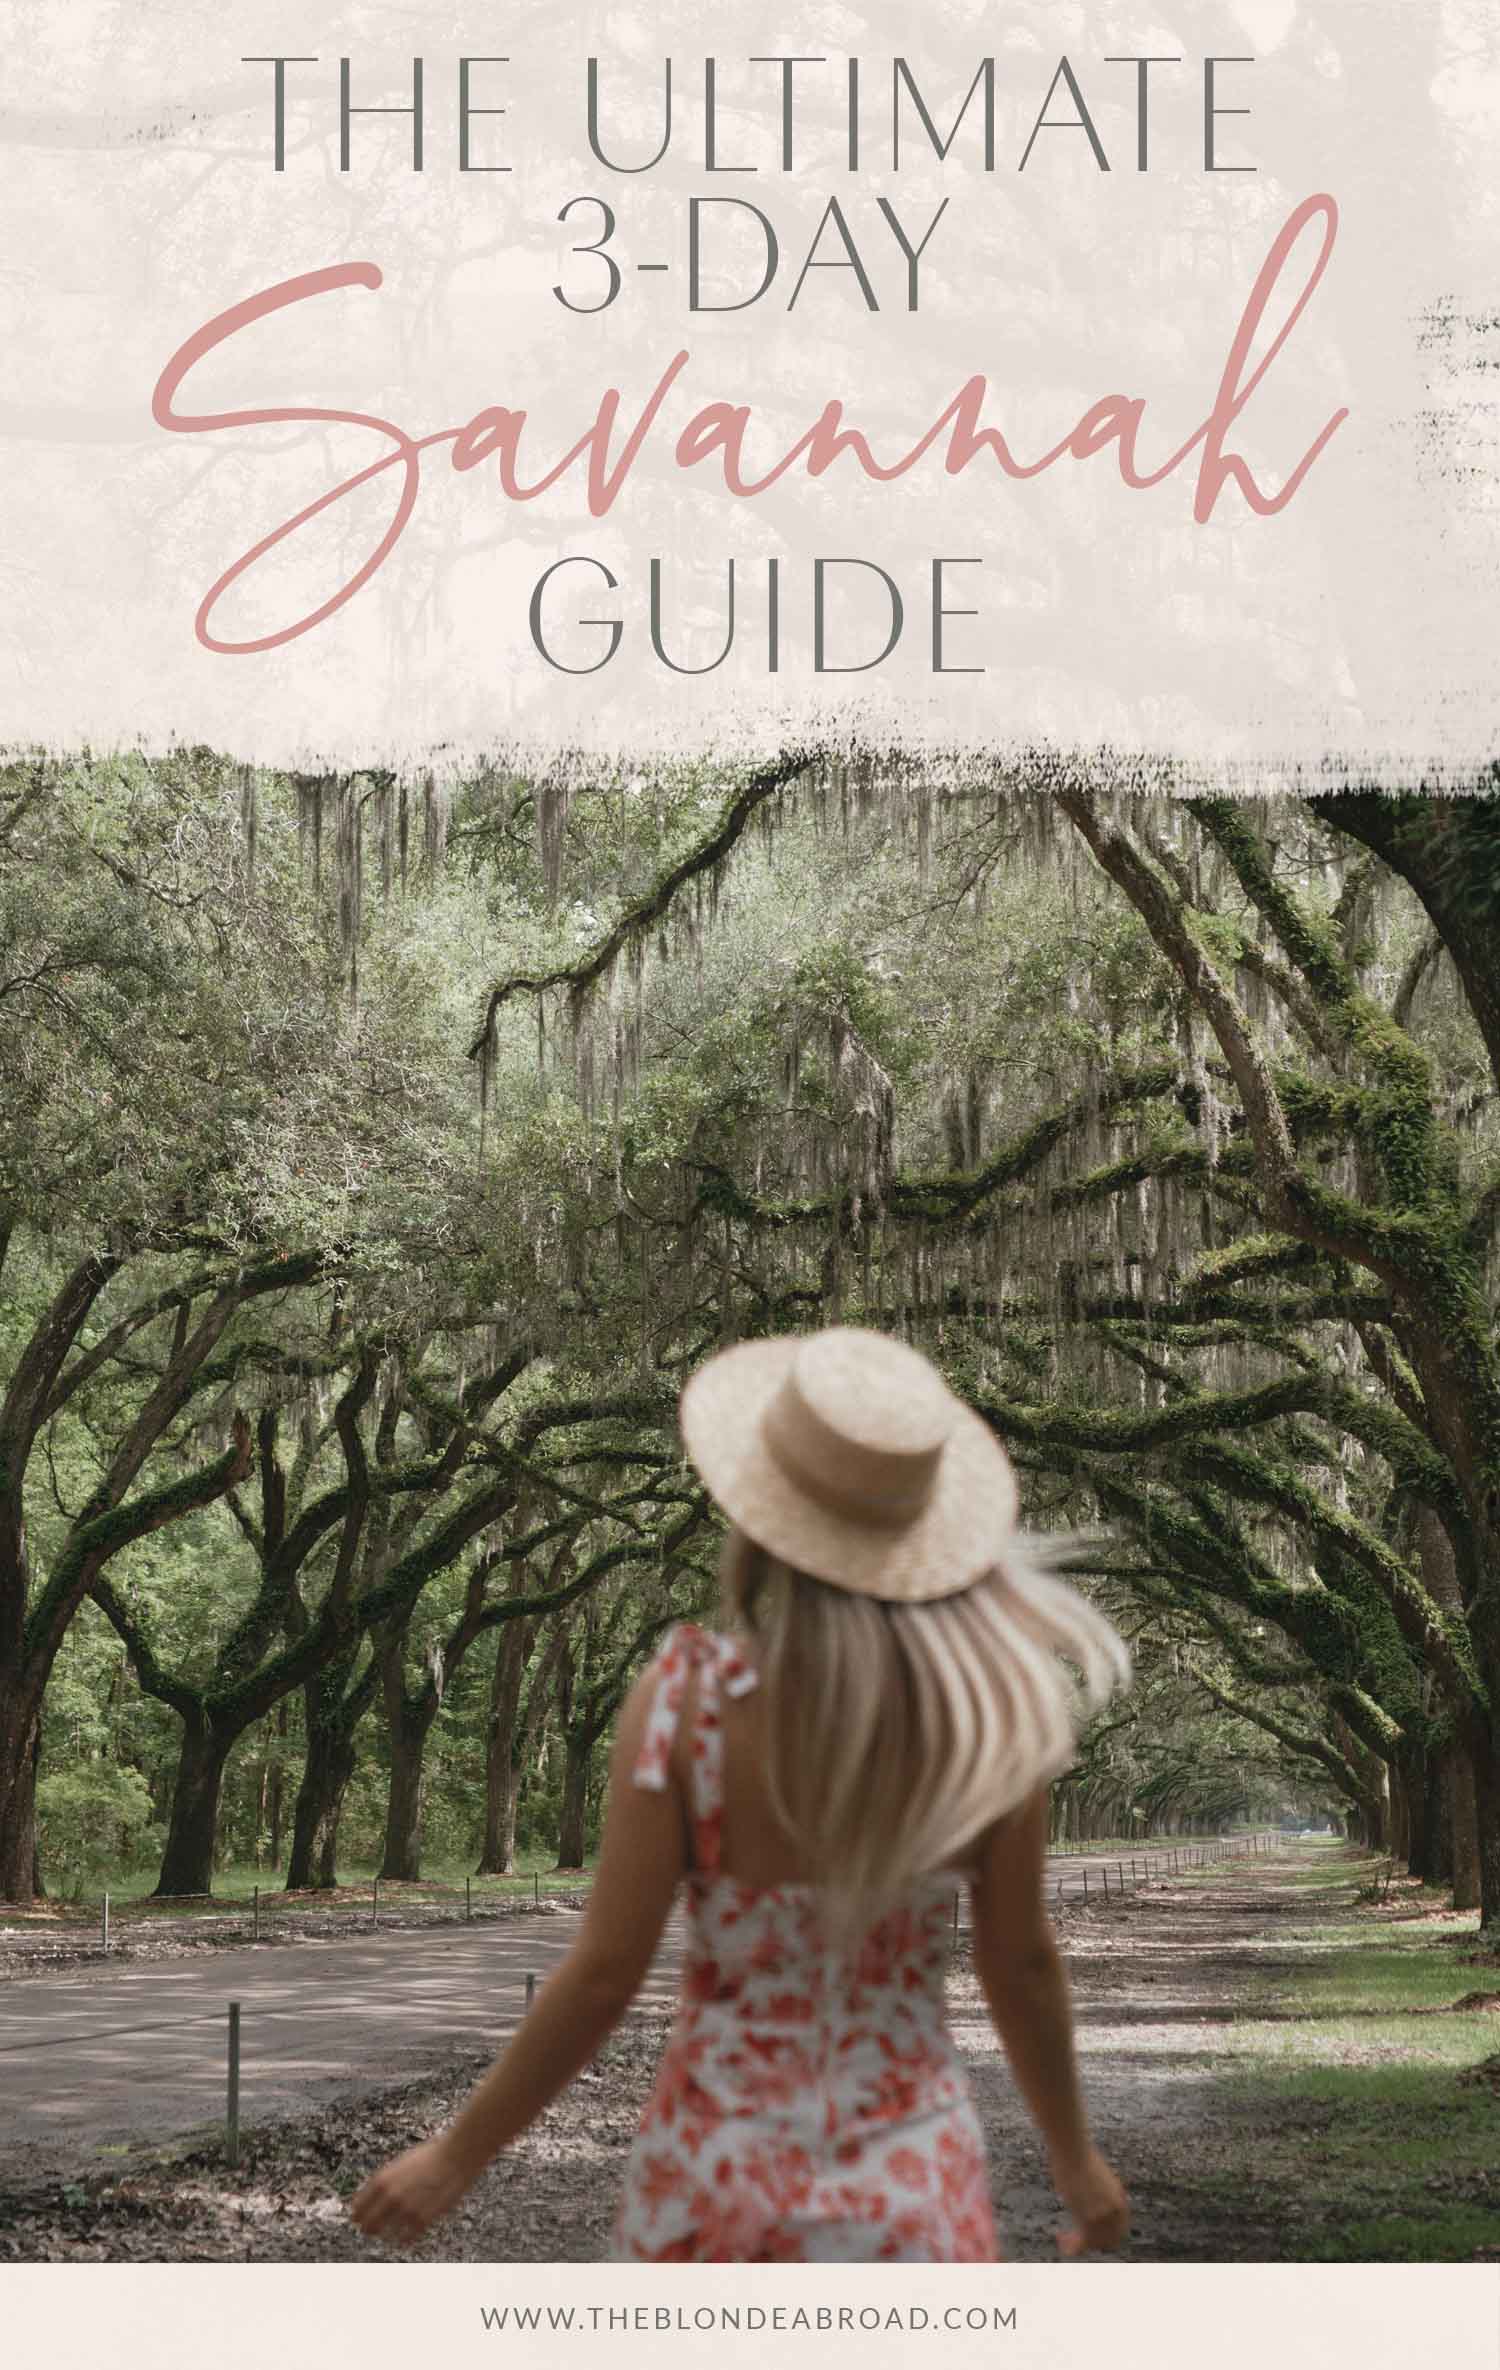 The Ultimate 3-Day Savannah Guide